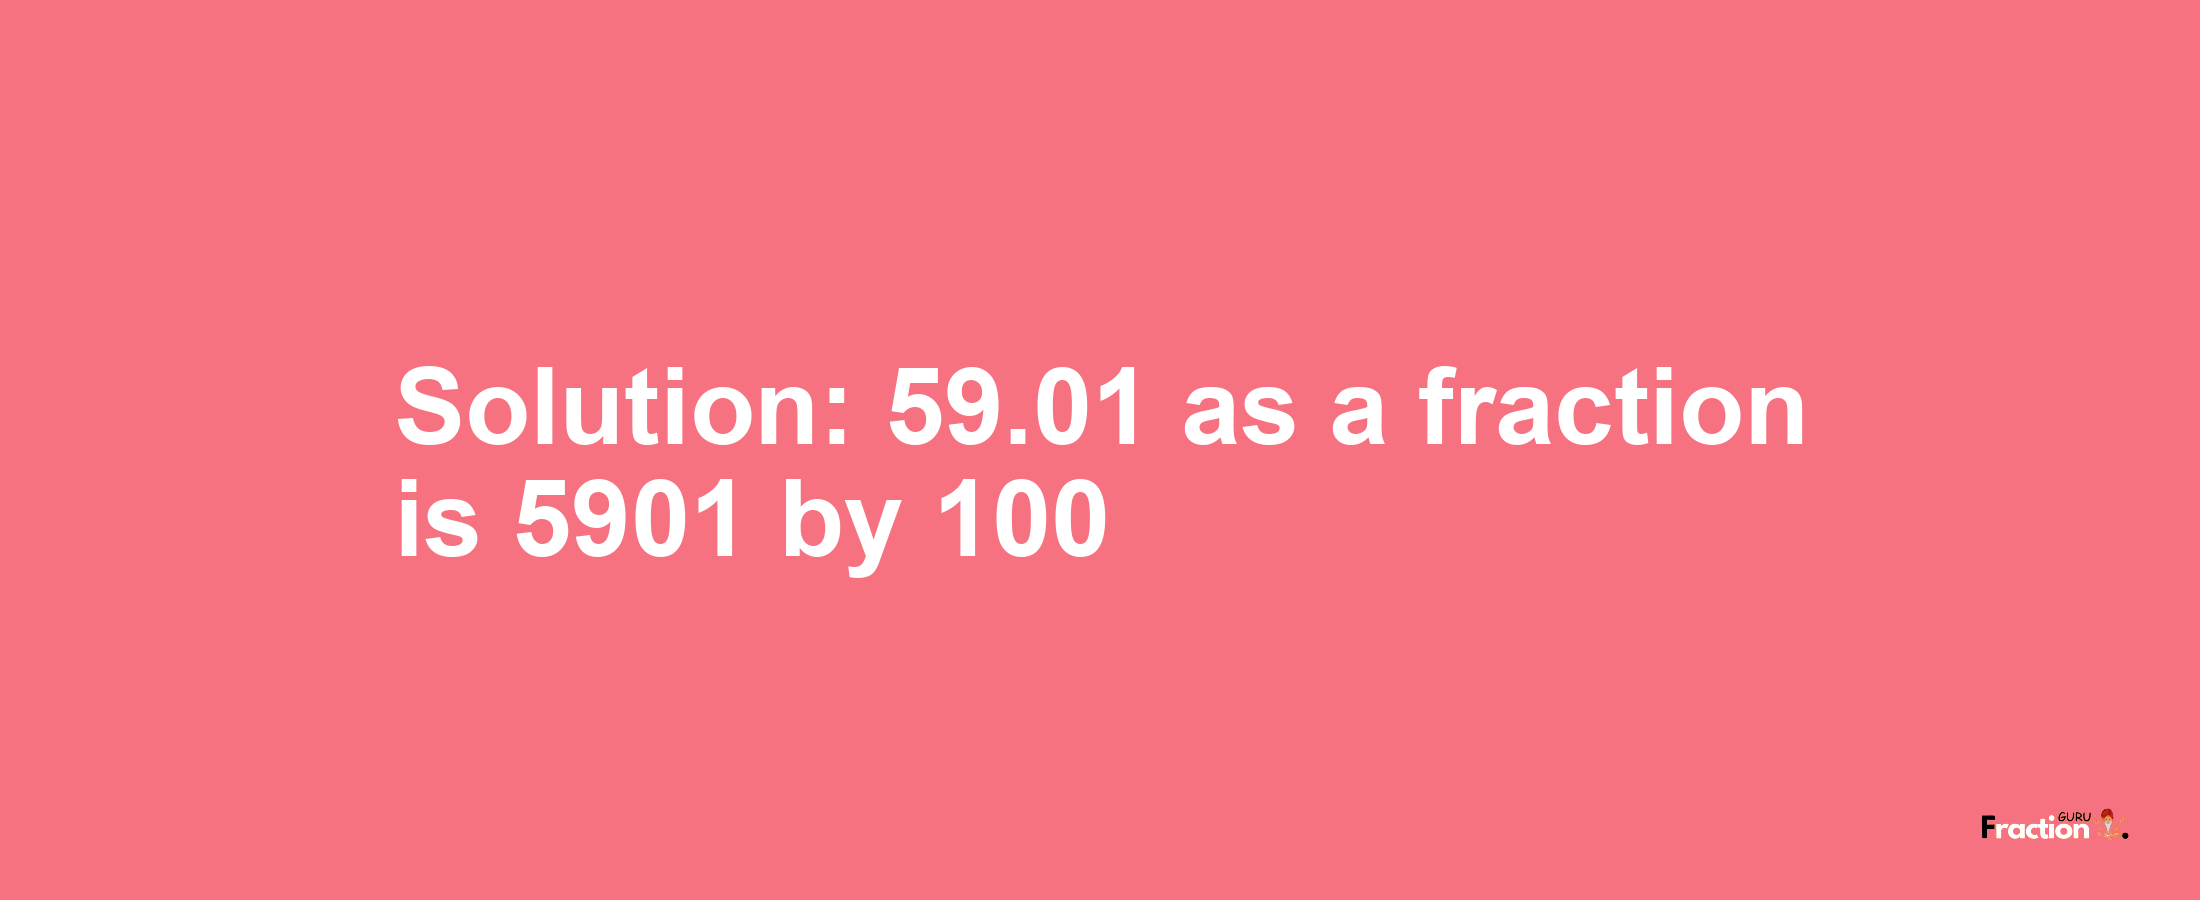 Solution:59.01 as a fraction is 5901/100